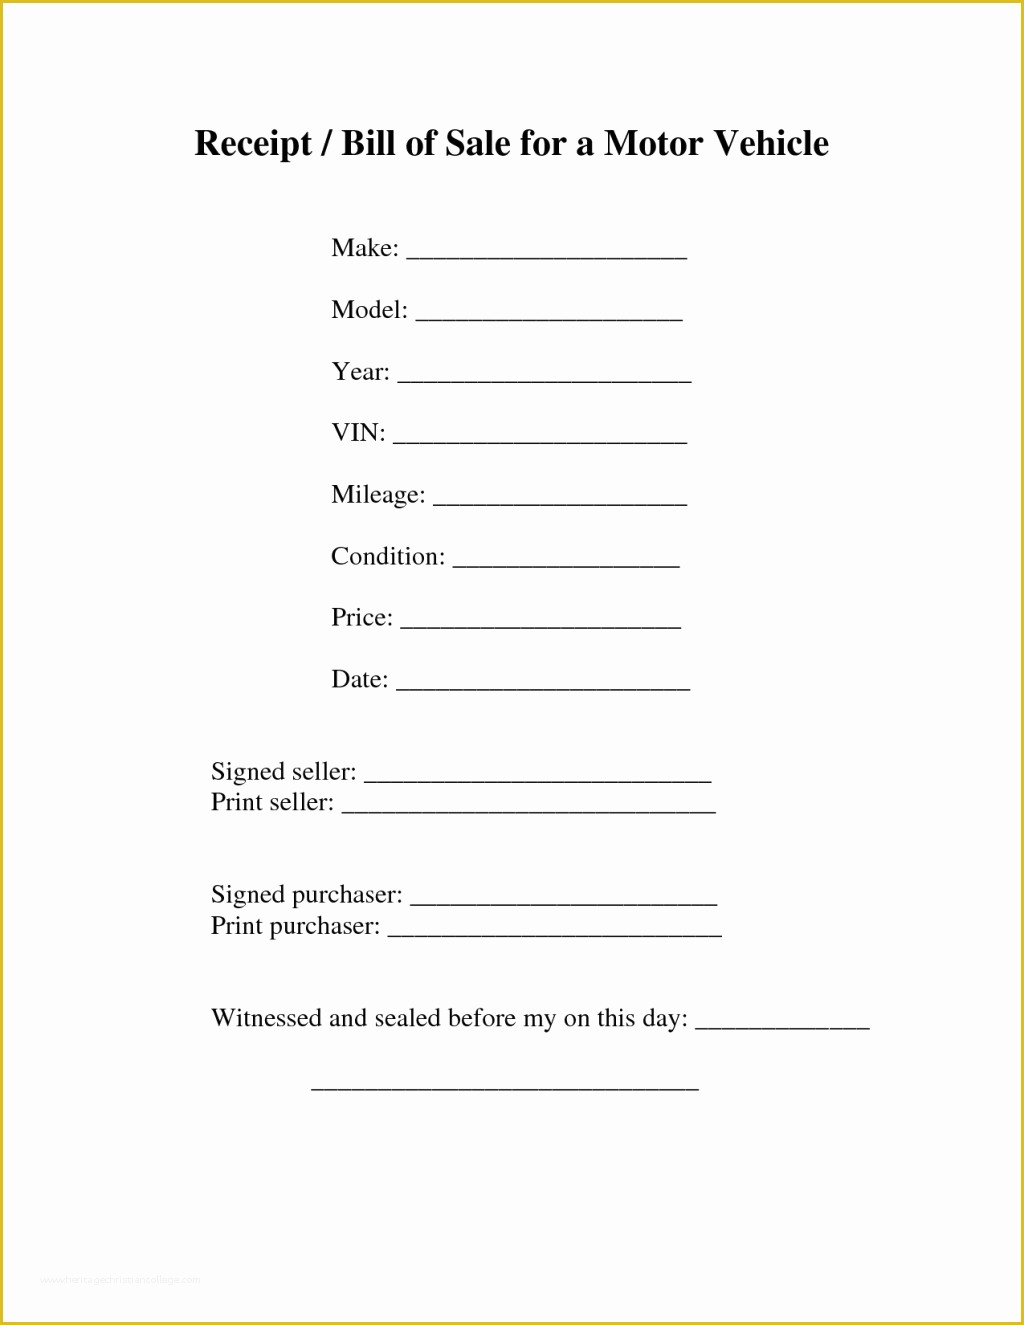 41-motorcycle-bill-of-sale-template-free-download-heritagechristiancollege